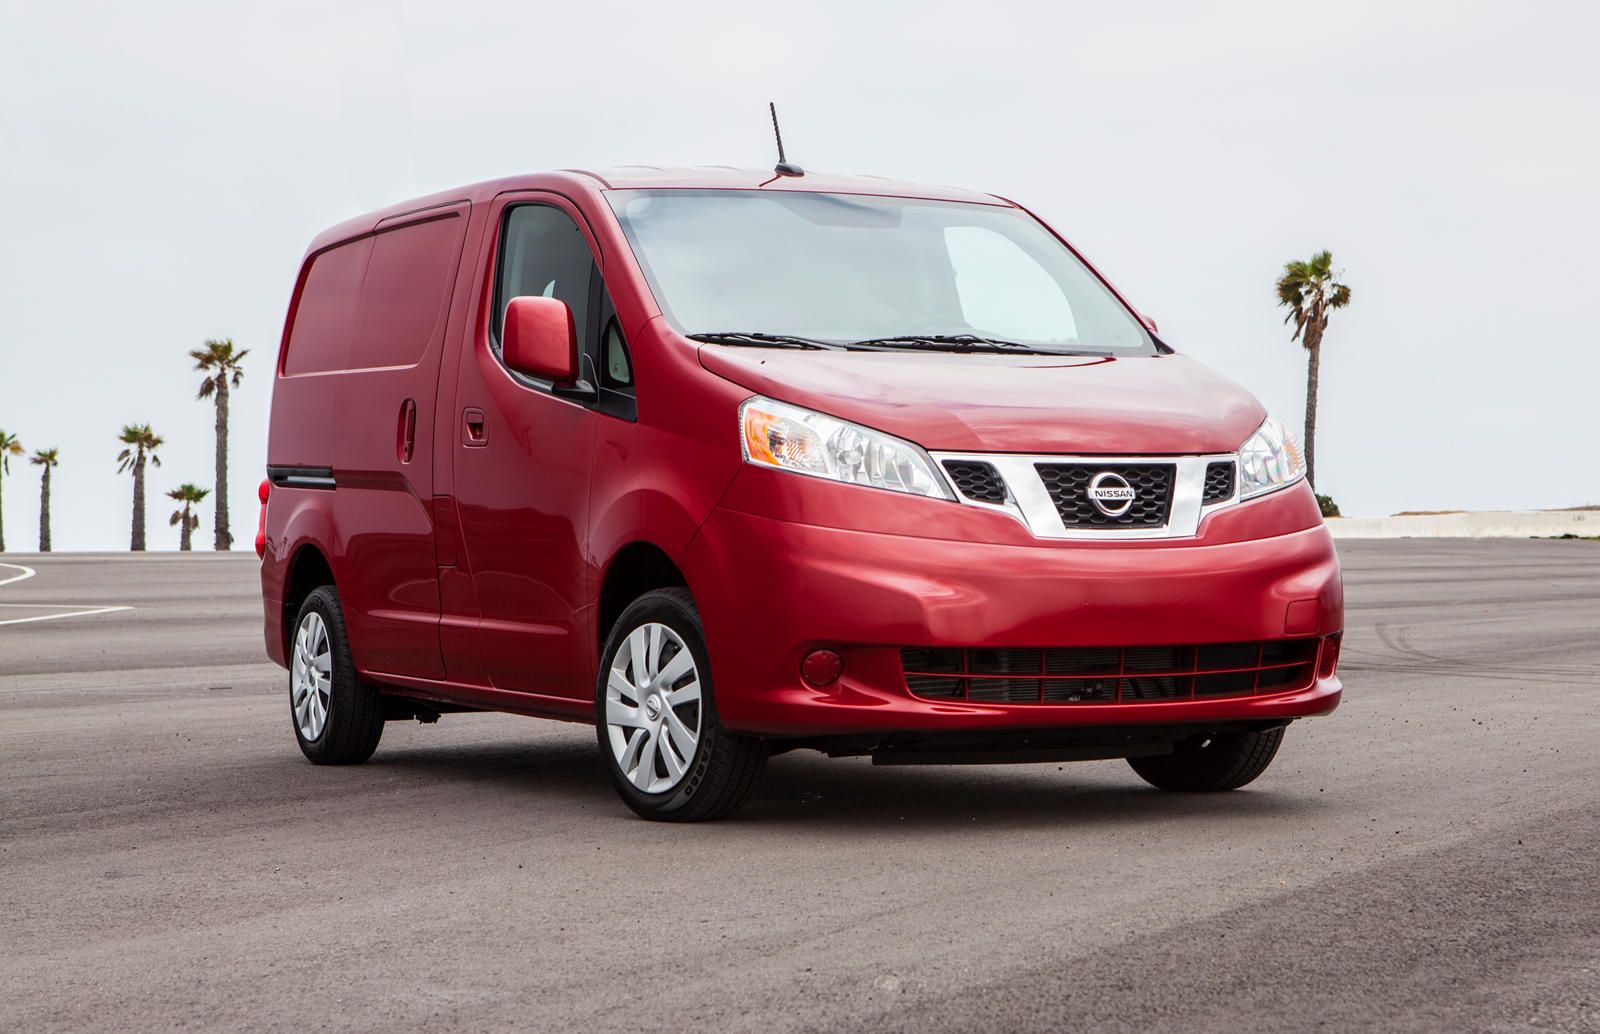 2020 Nissan NV200 Compact Cargo: Review, Trims, Specs, Price, New